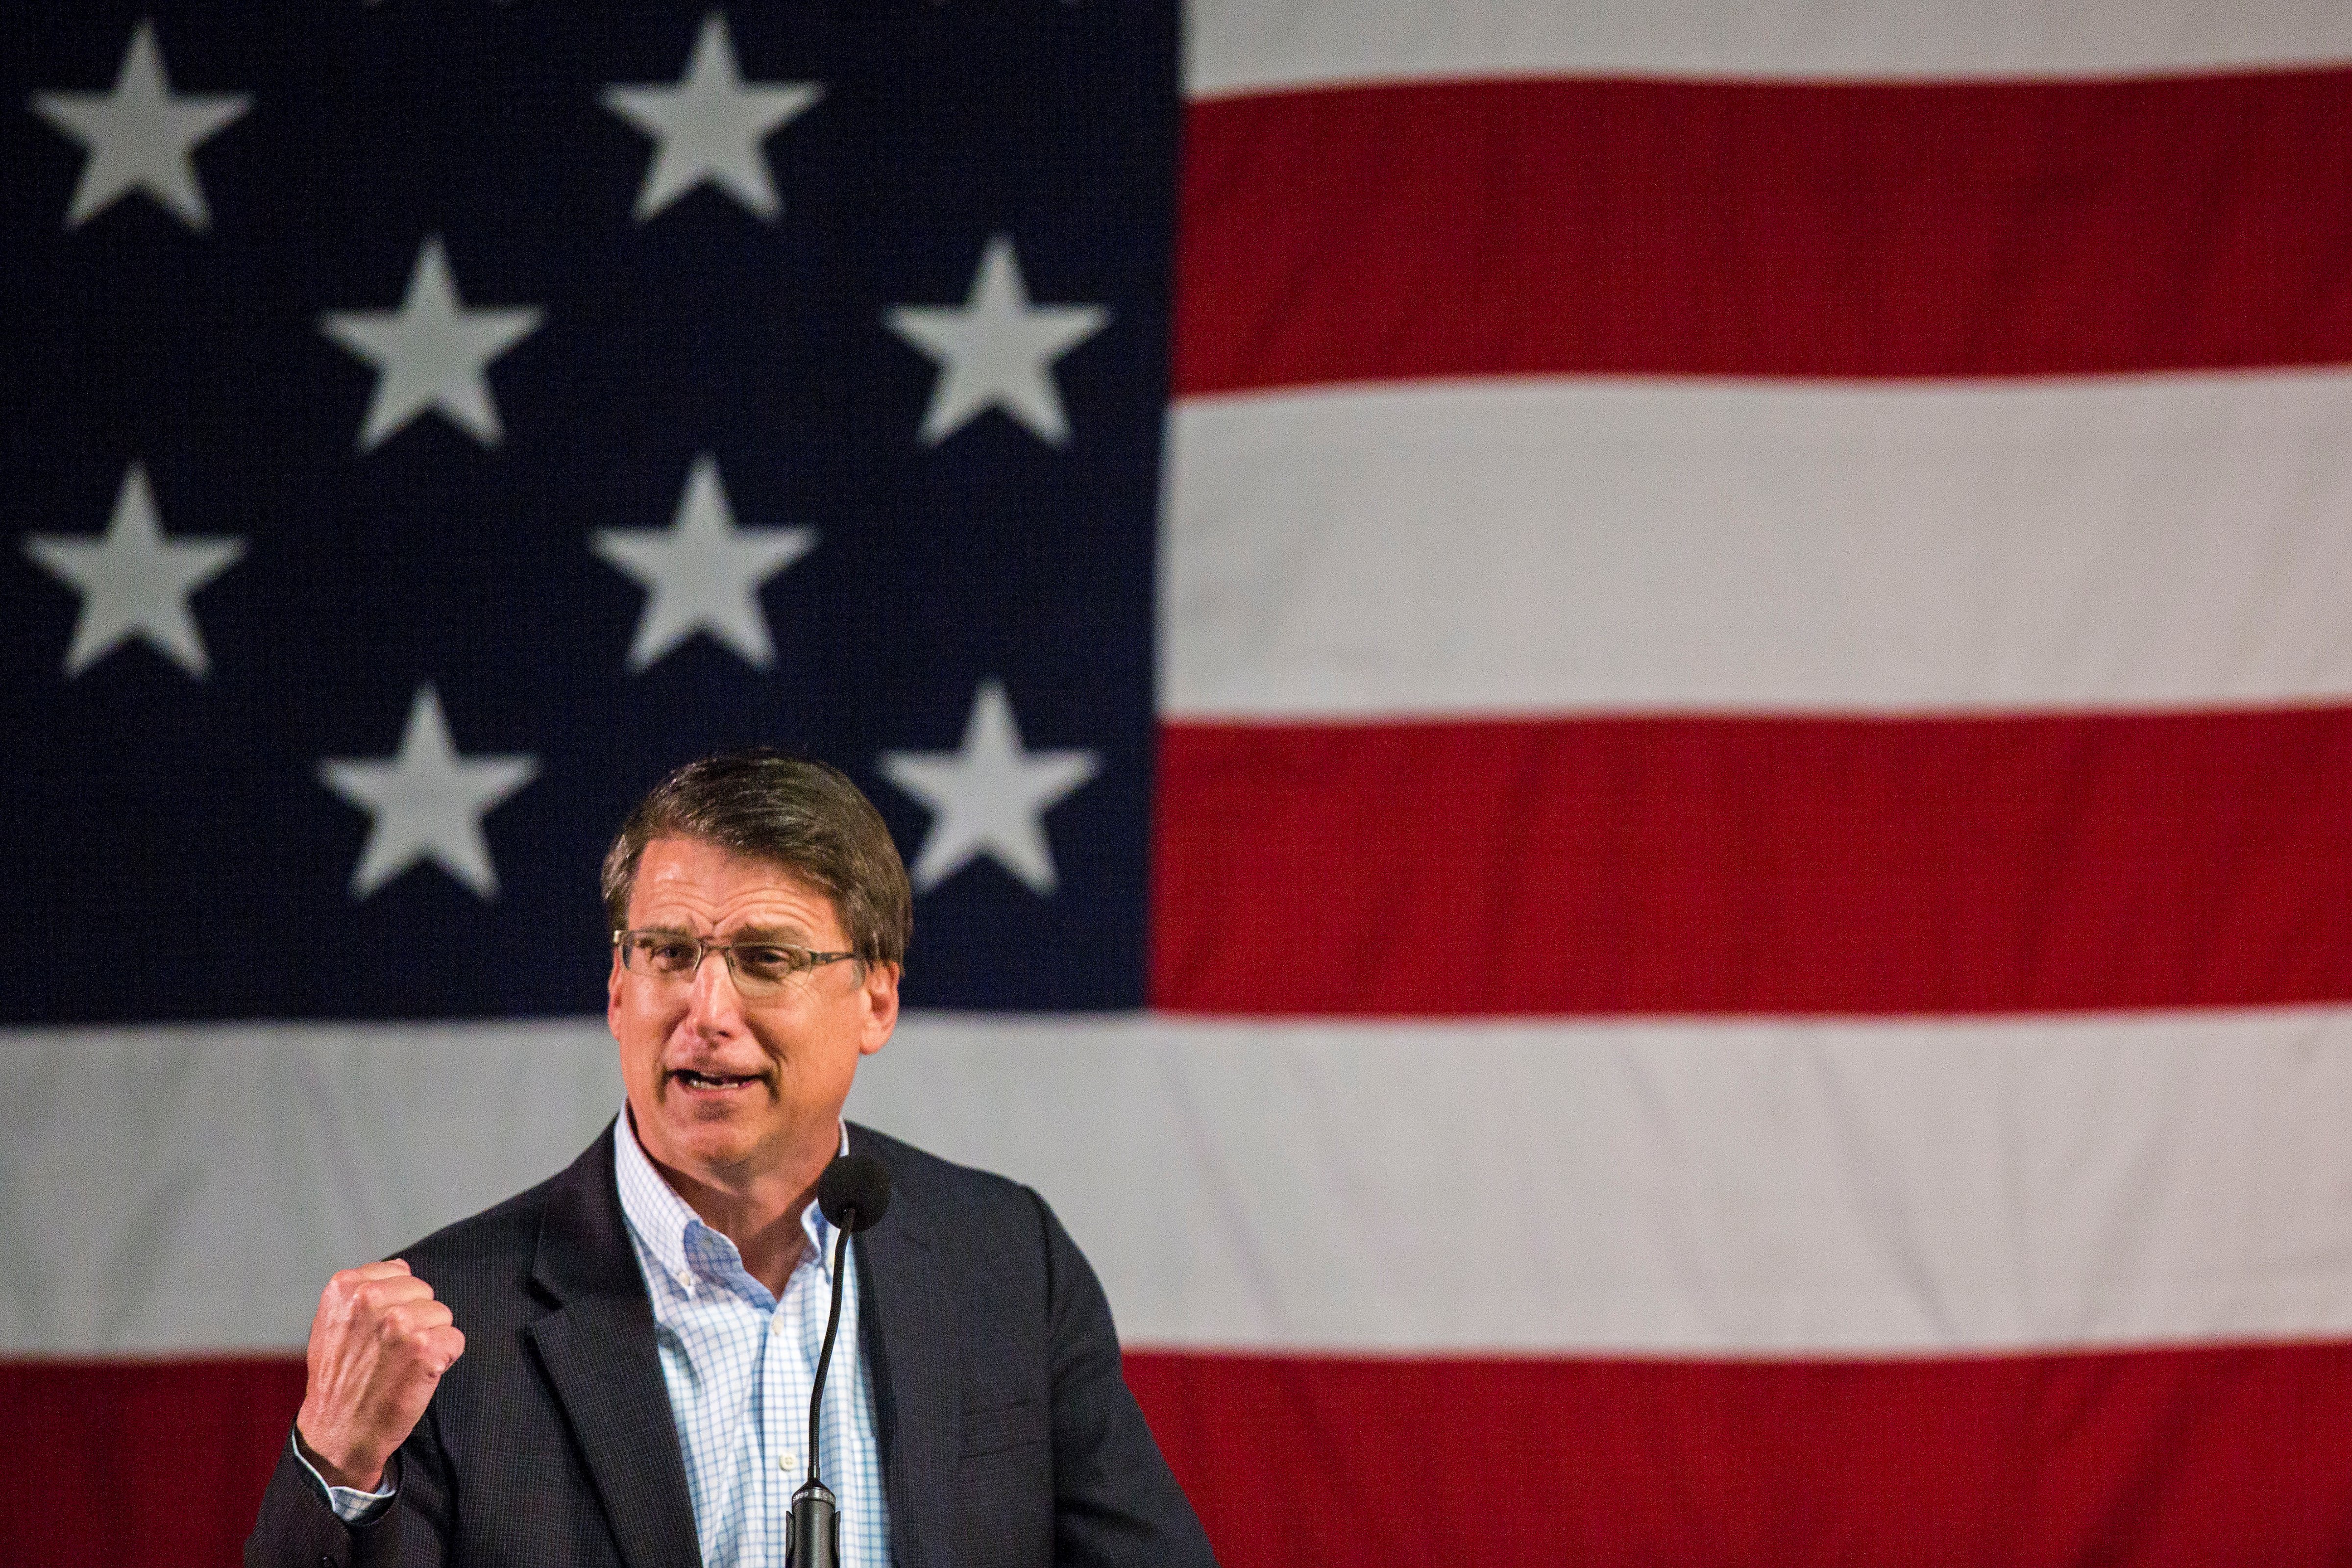 North Carolina Gov. Pat McCrory speaks at the Wake County Republican Party 2016 County Convention at the N.C. State Fairgrounds, in Raleigh, N.C. on March 8, 2016. (Al Drago—CQ-Roll Call,Inc./Getty Images)